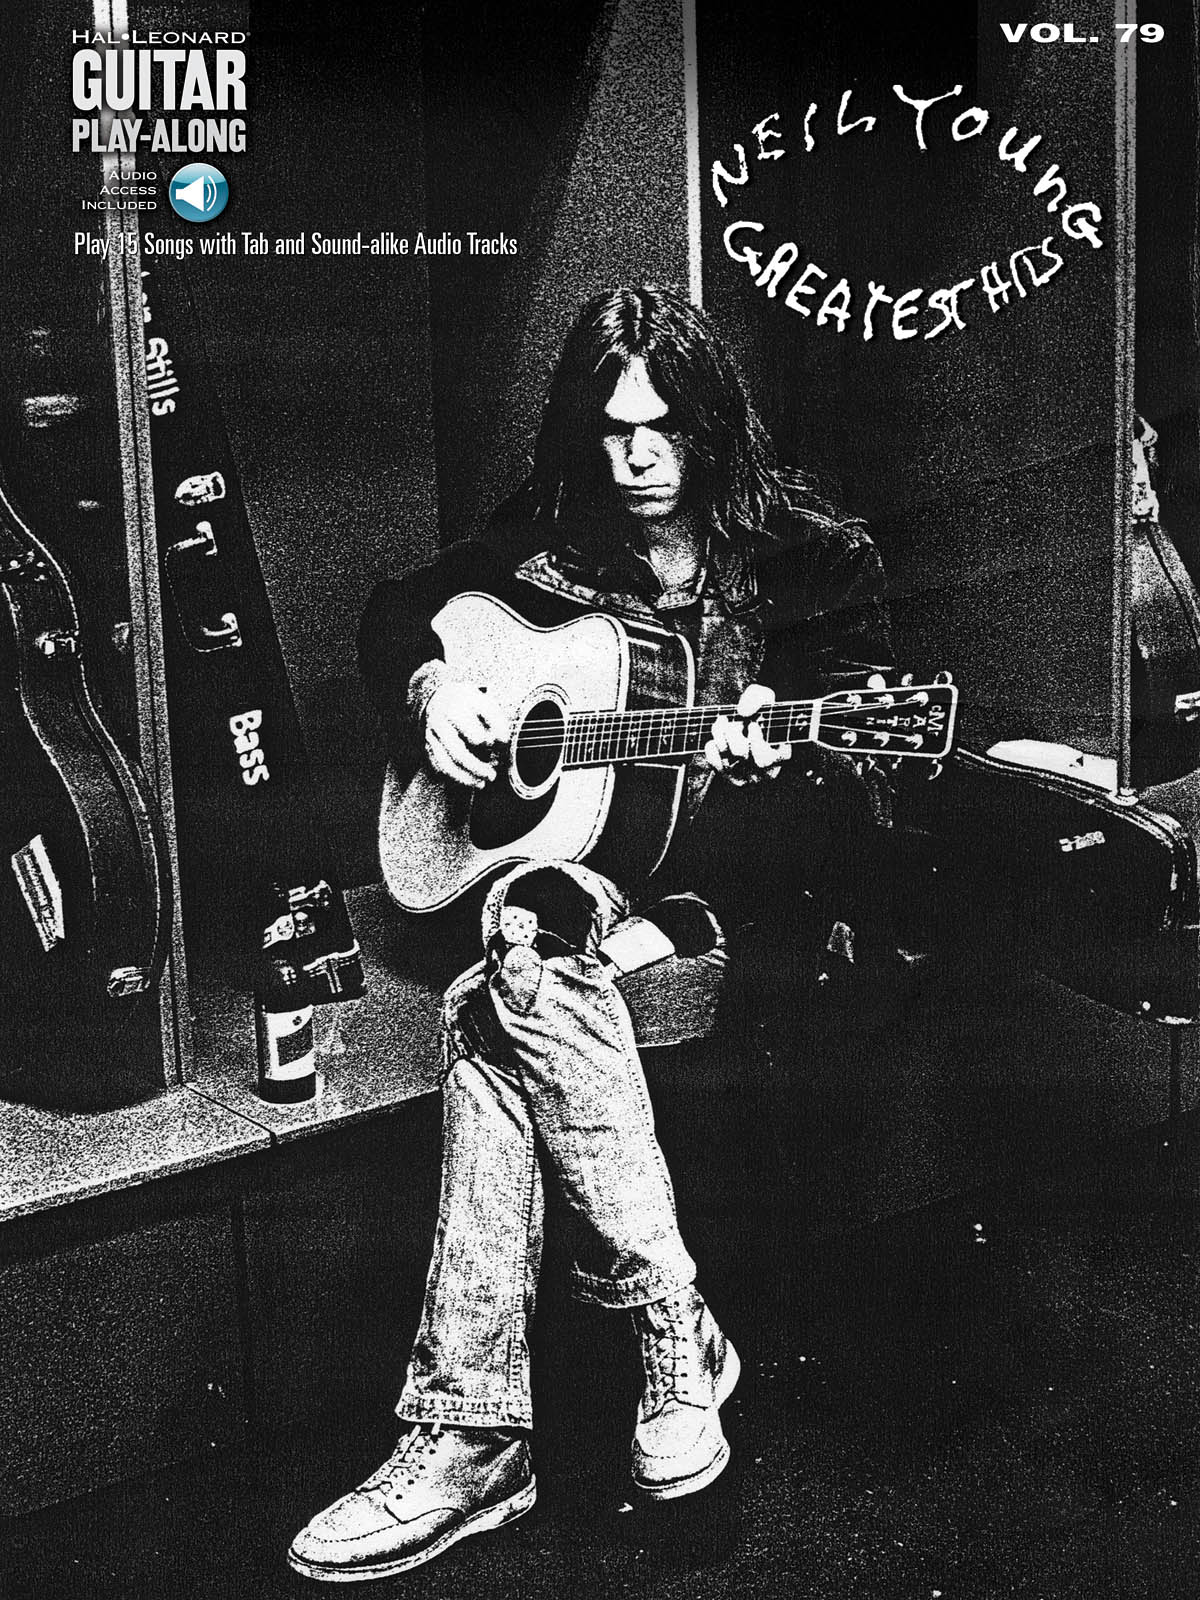 Neil Young - Guitar Play-Along Volume 79